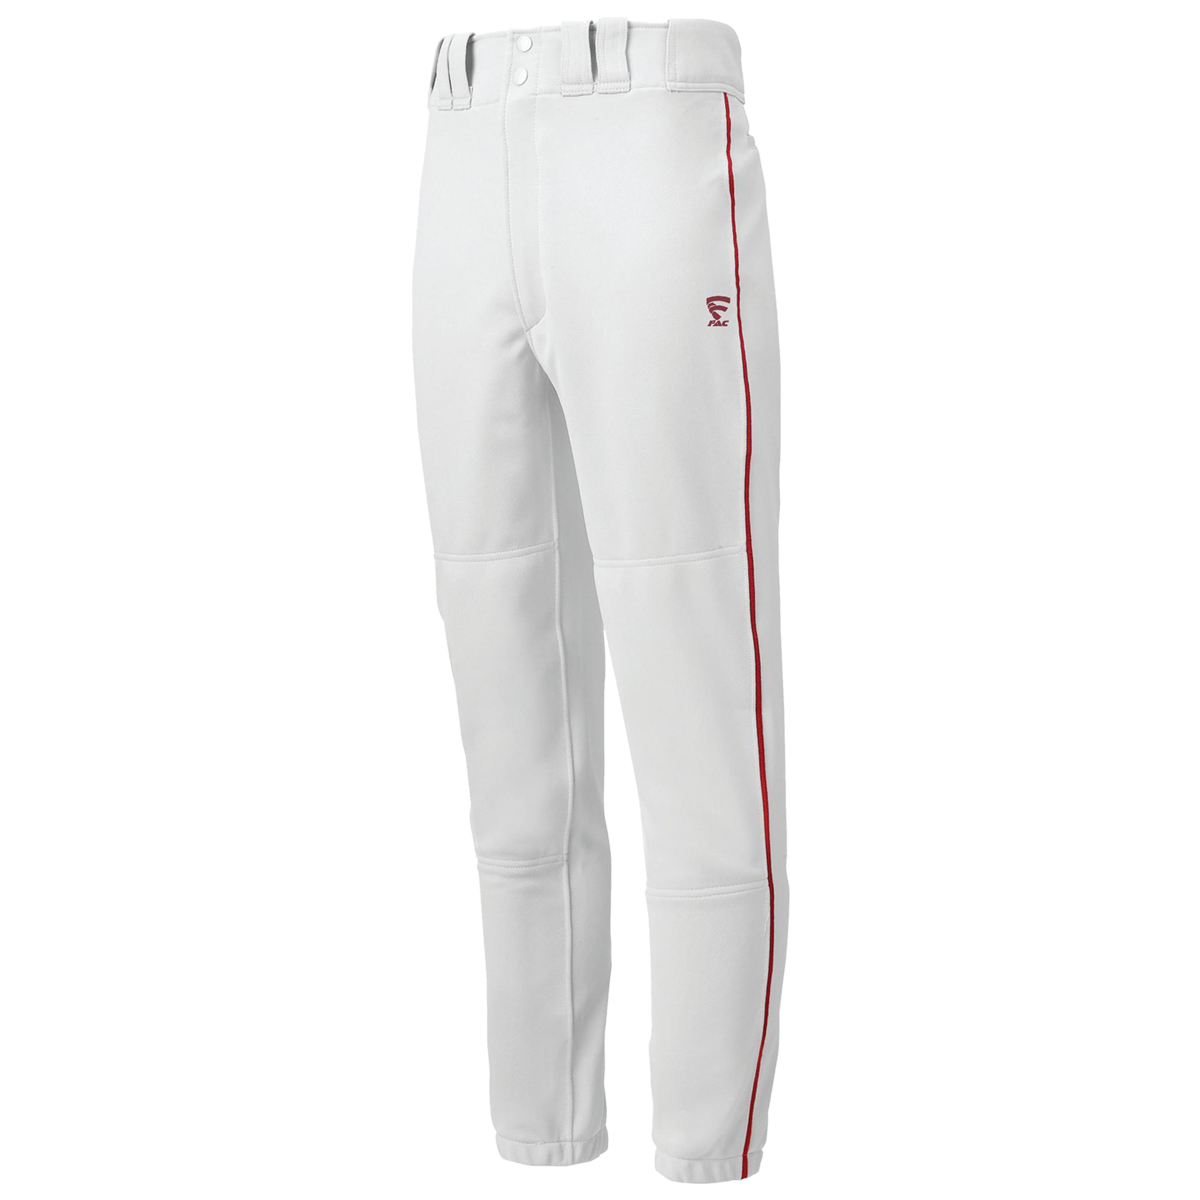 Premier Piped Baseball Pant's – First American Corporation (Pvt) Ltd